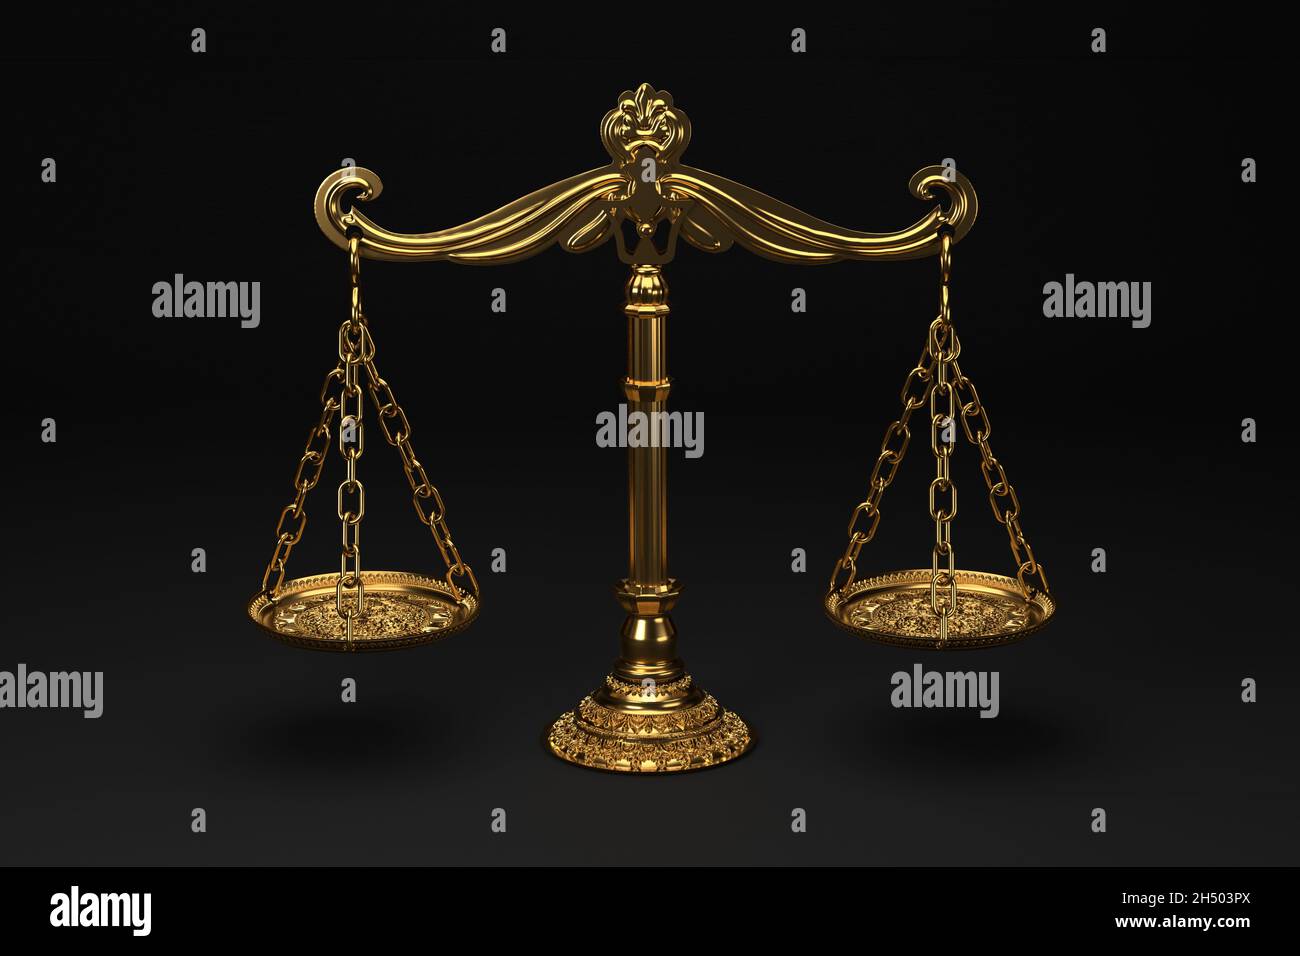 Law scales on black background. Symbol of justice Stock Photo